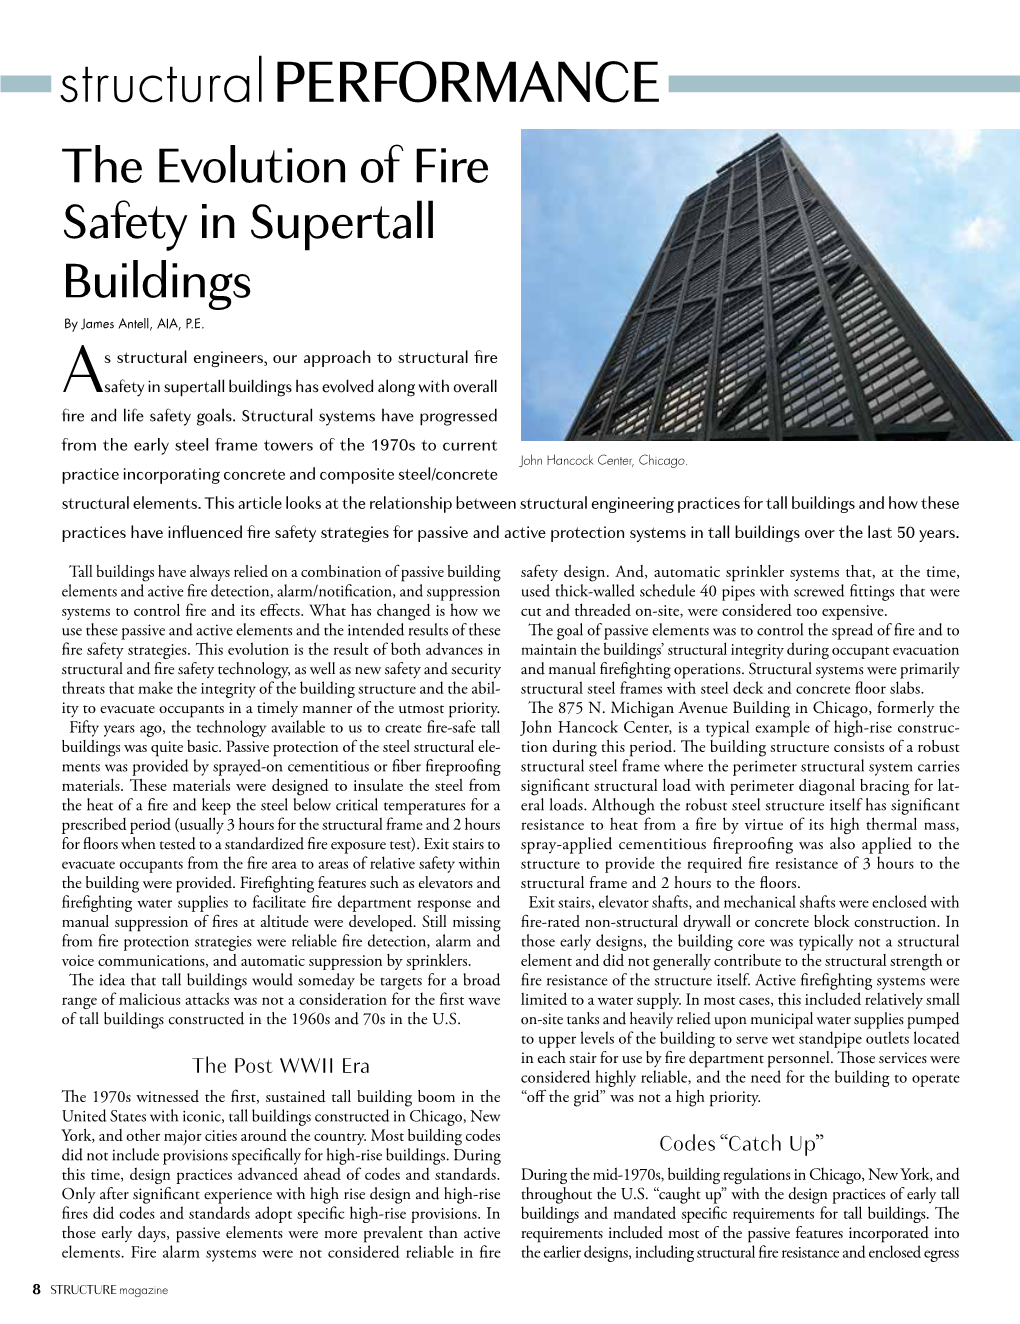 Structural PERFORMANCE the Evolution of Fire Safety in Supertall Buildings by James Antell, AIA, P.E